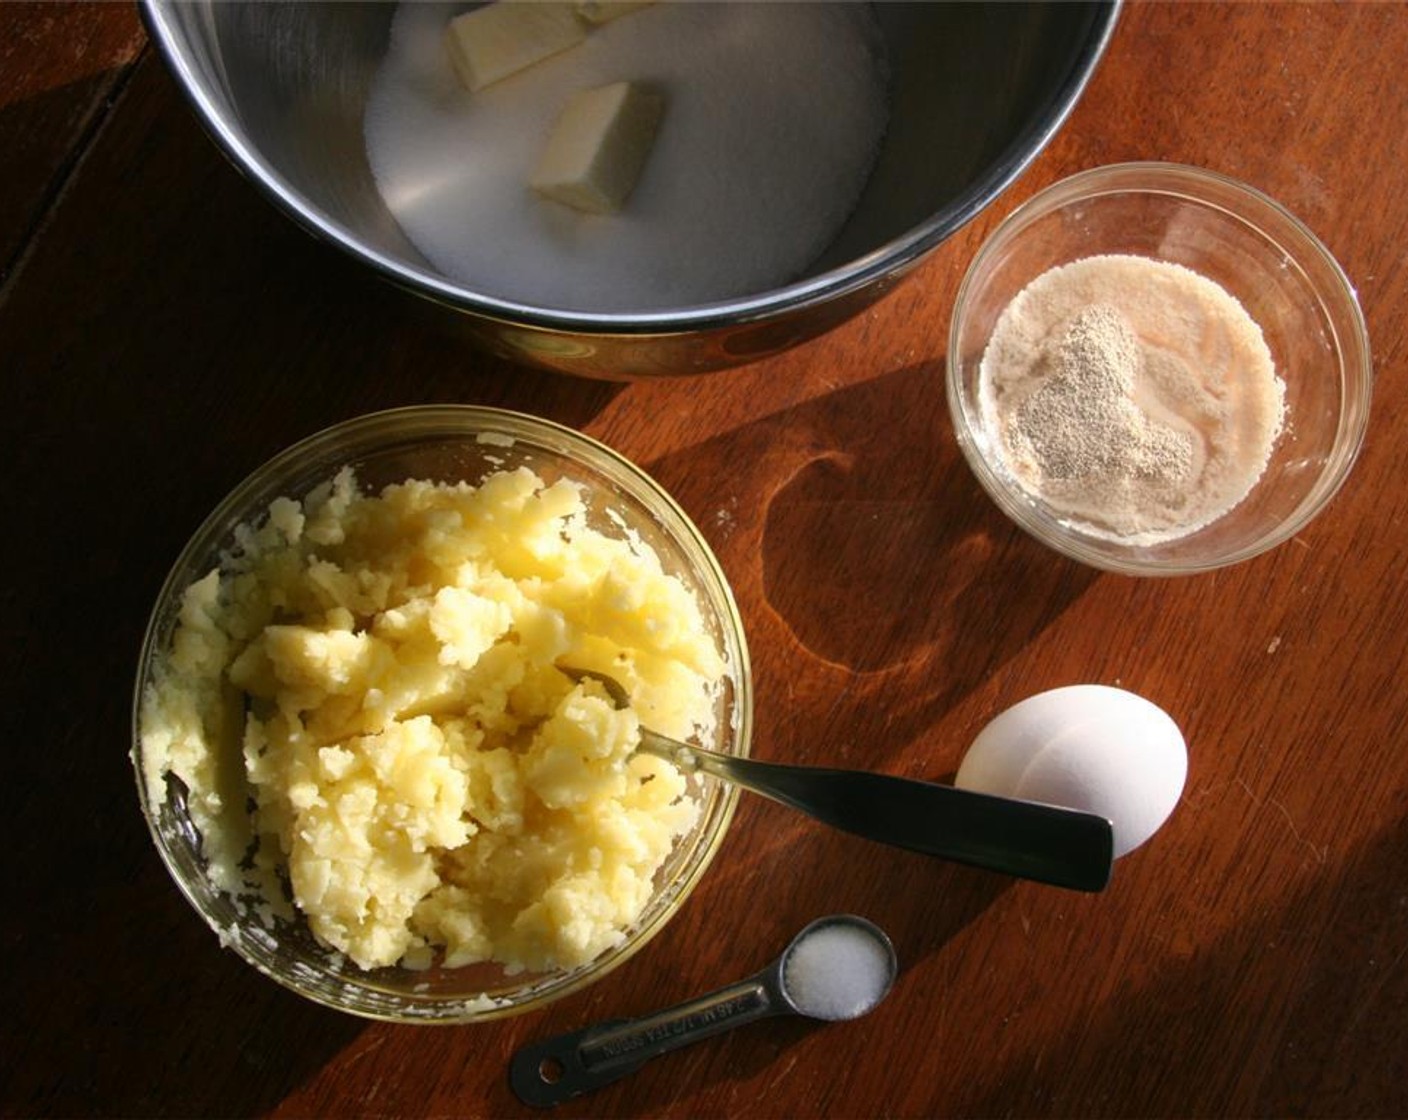 step 4 Cream 6 tablespoons of the Unsalted Butter (1/3 cup) and Granulated Sugar (1/2 cup) until fluffy in a medium bowl. Add the Salt (1/2 tsp) and Egg (1). Stir in the mashed potato and the yeast mixture.